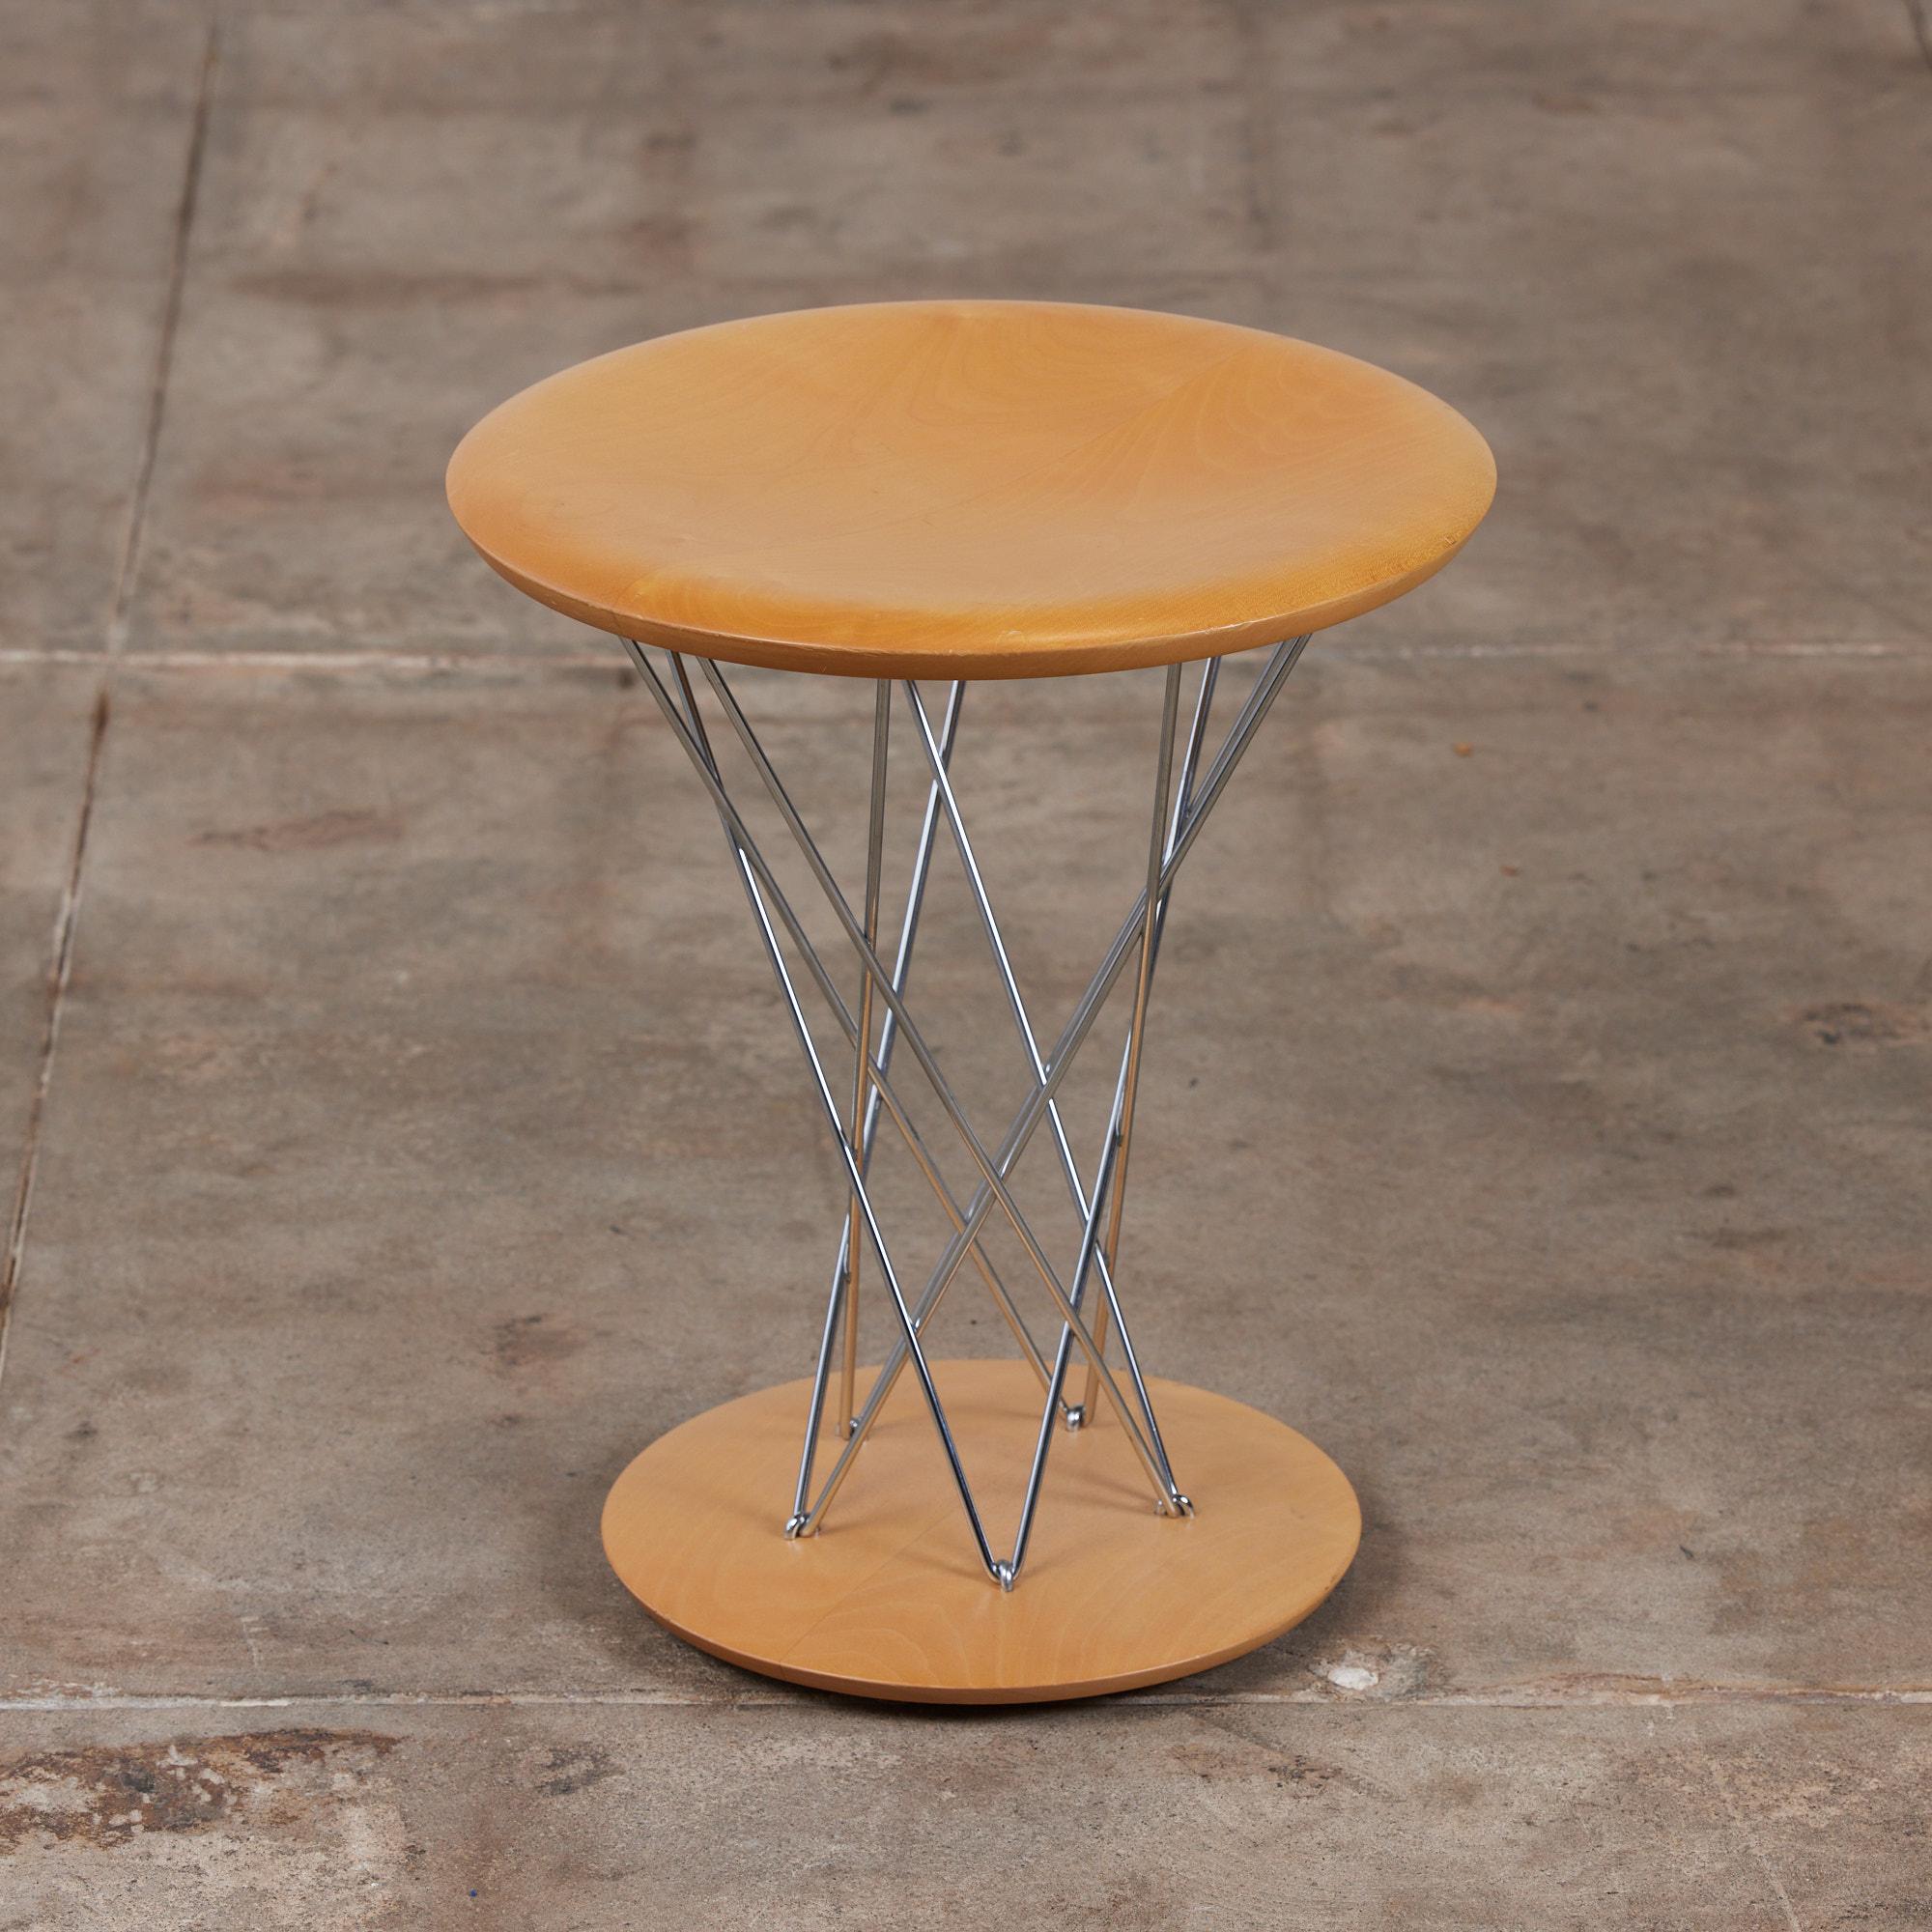 Isamu Noguchi rocking stool, originally designed in 1954 this example was reissued in 2001 for Vitra. This stool features a maple seat and base with steel chrome plated rods connecting the two pieces giving it its nickname, 